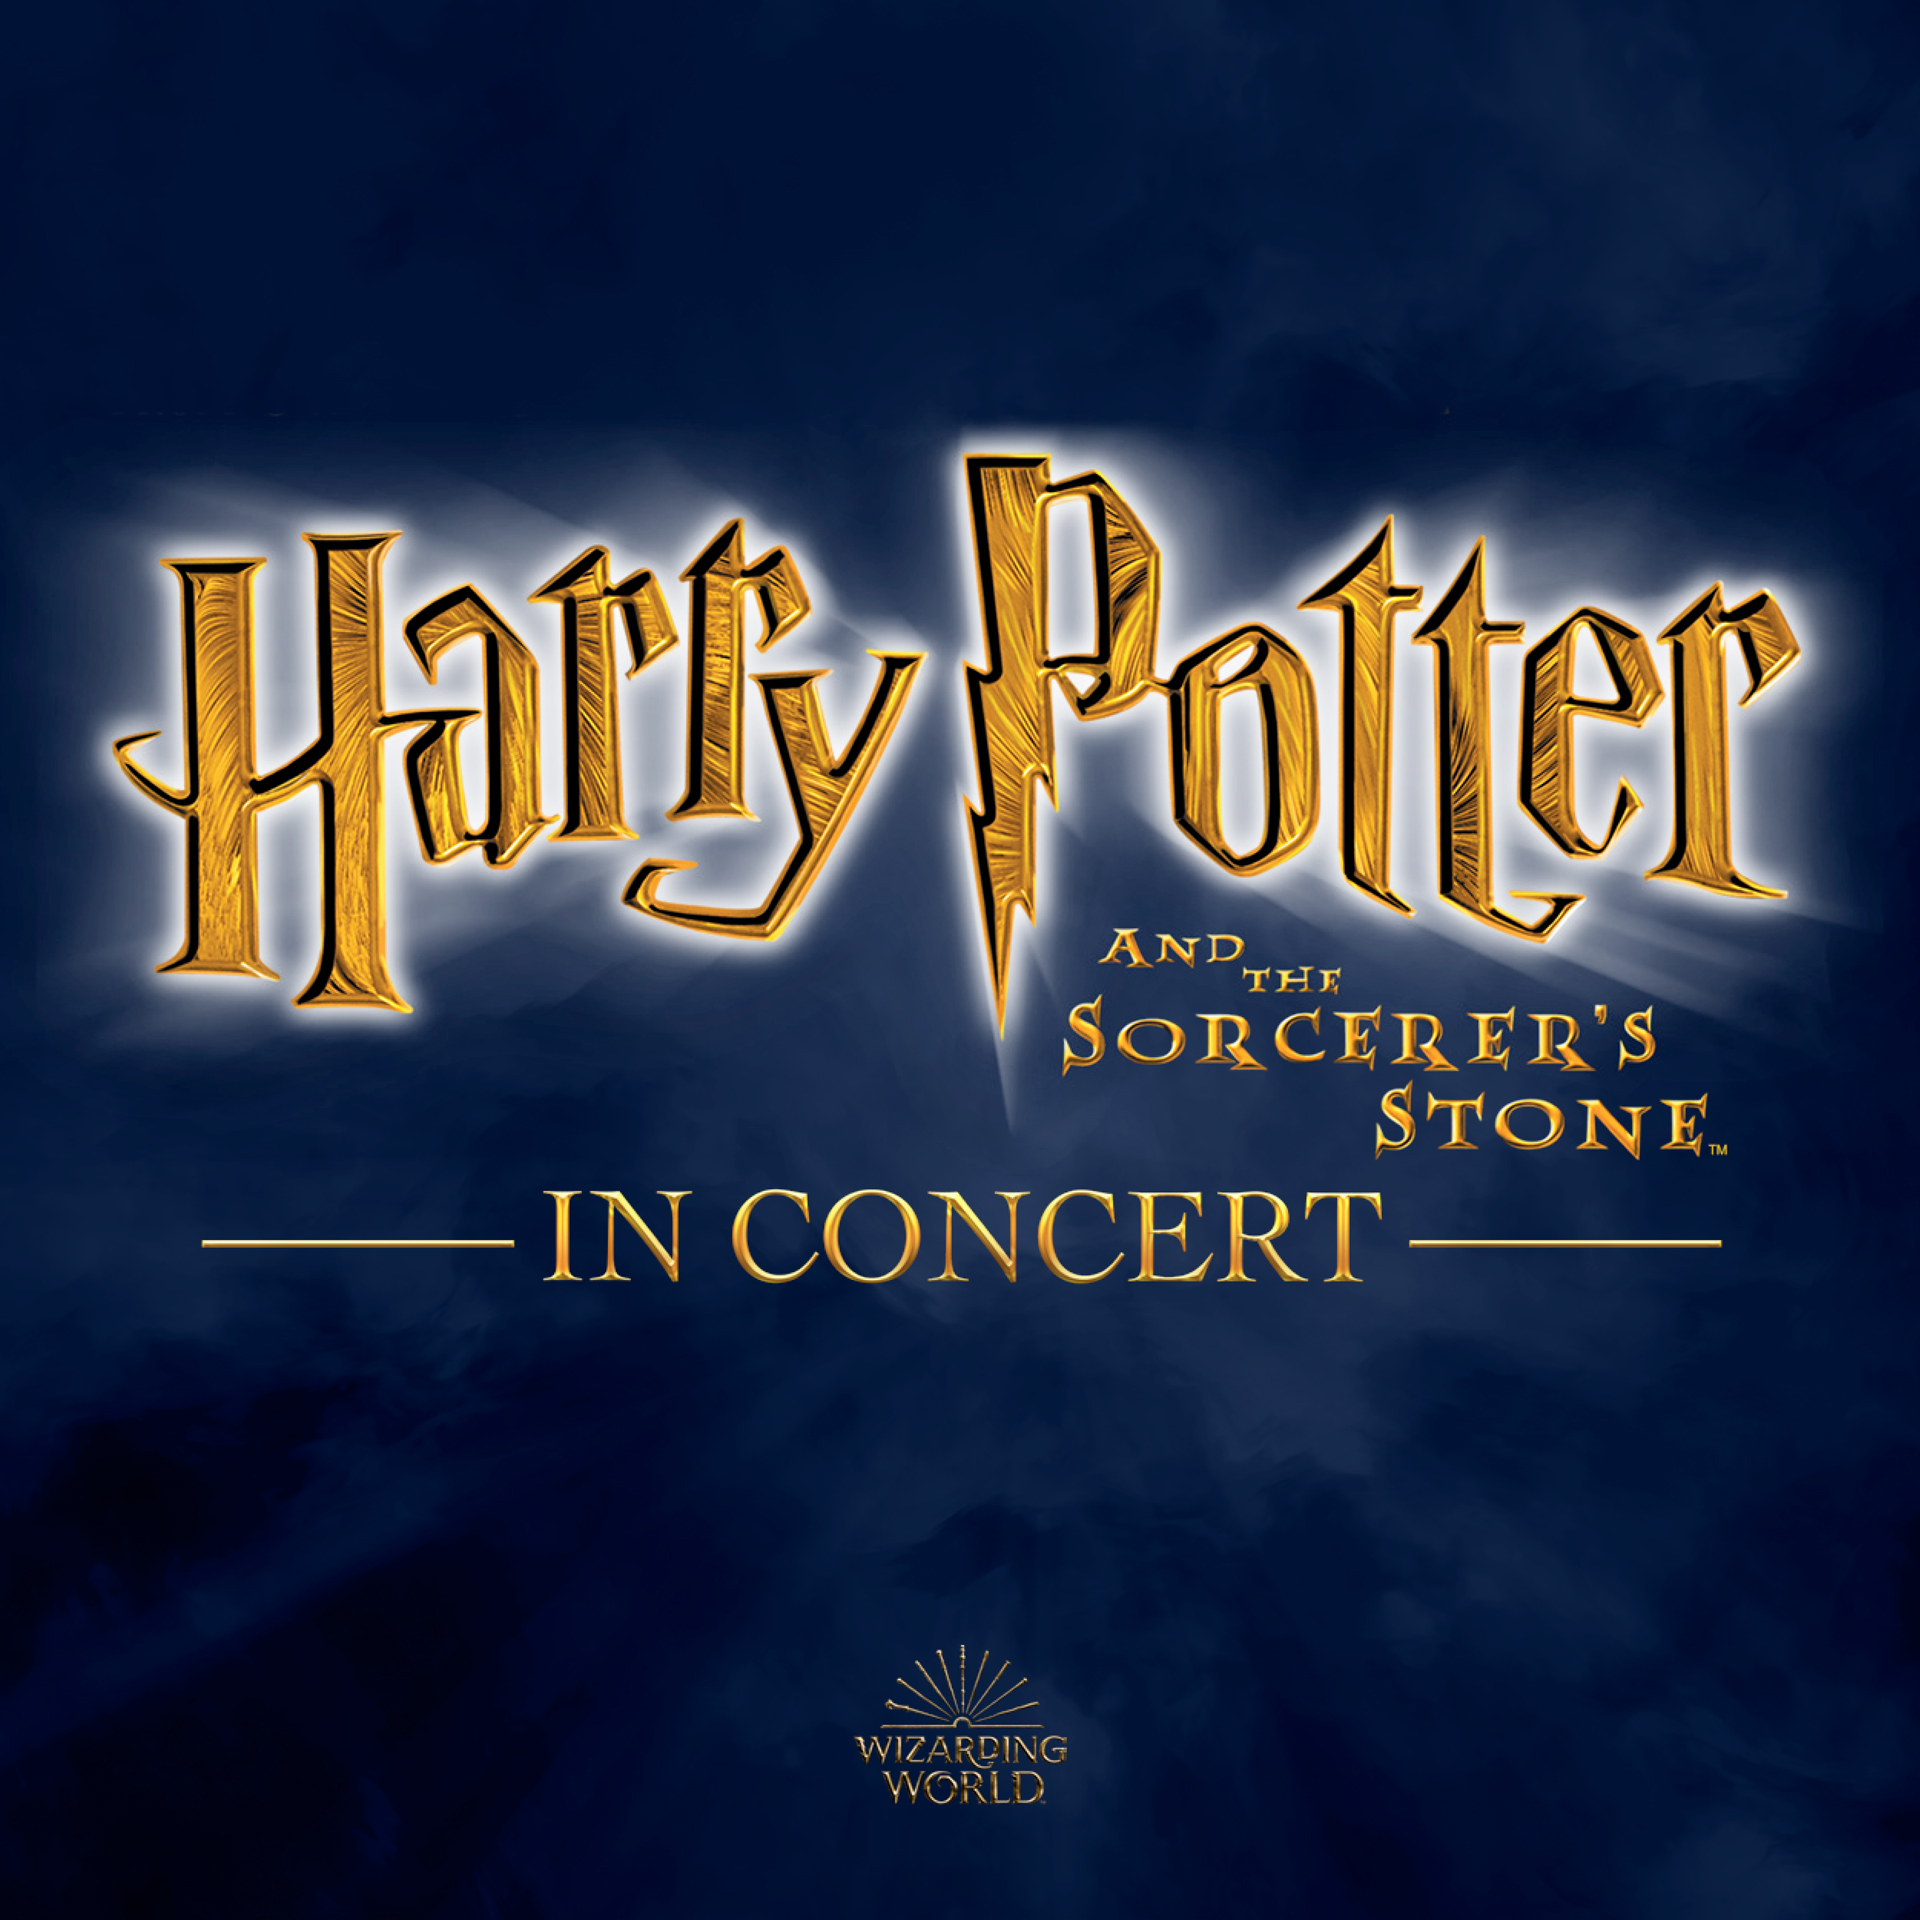 Harry Potter and the Sorcerer's Stone in Concert